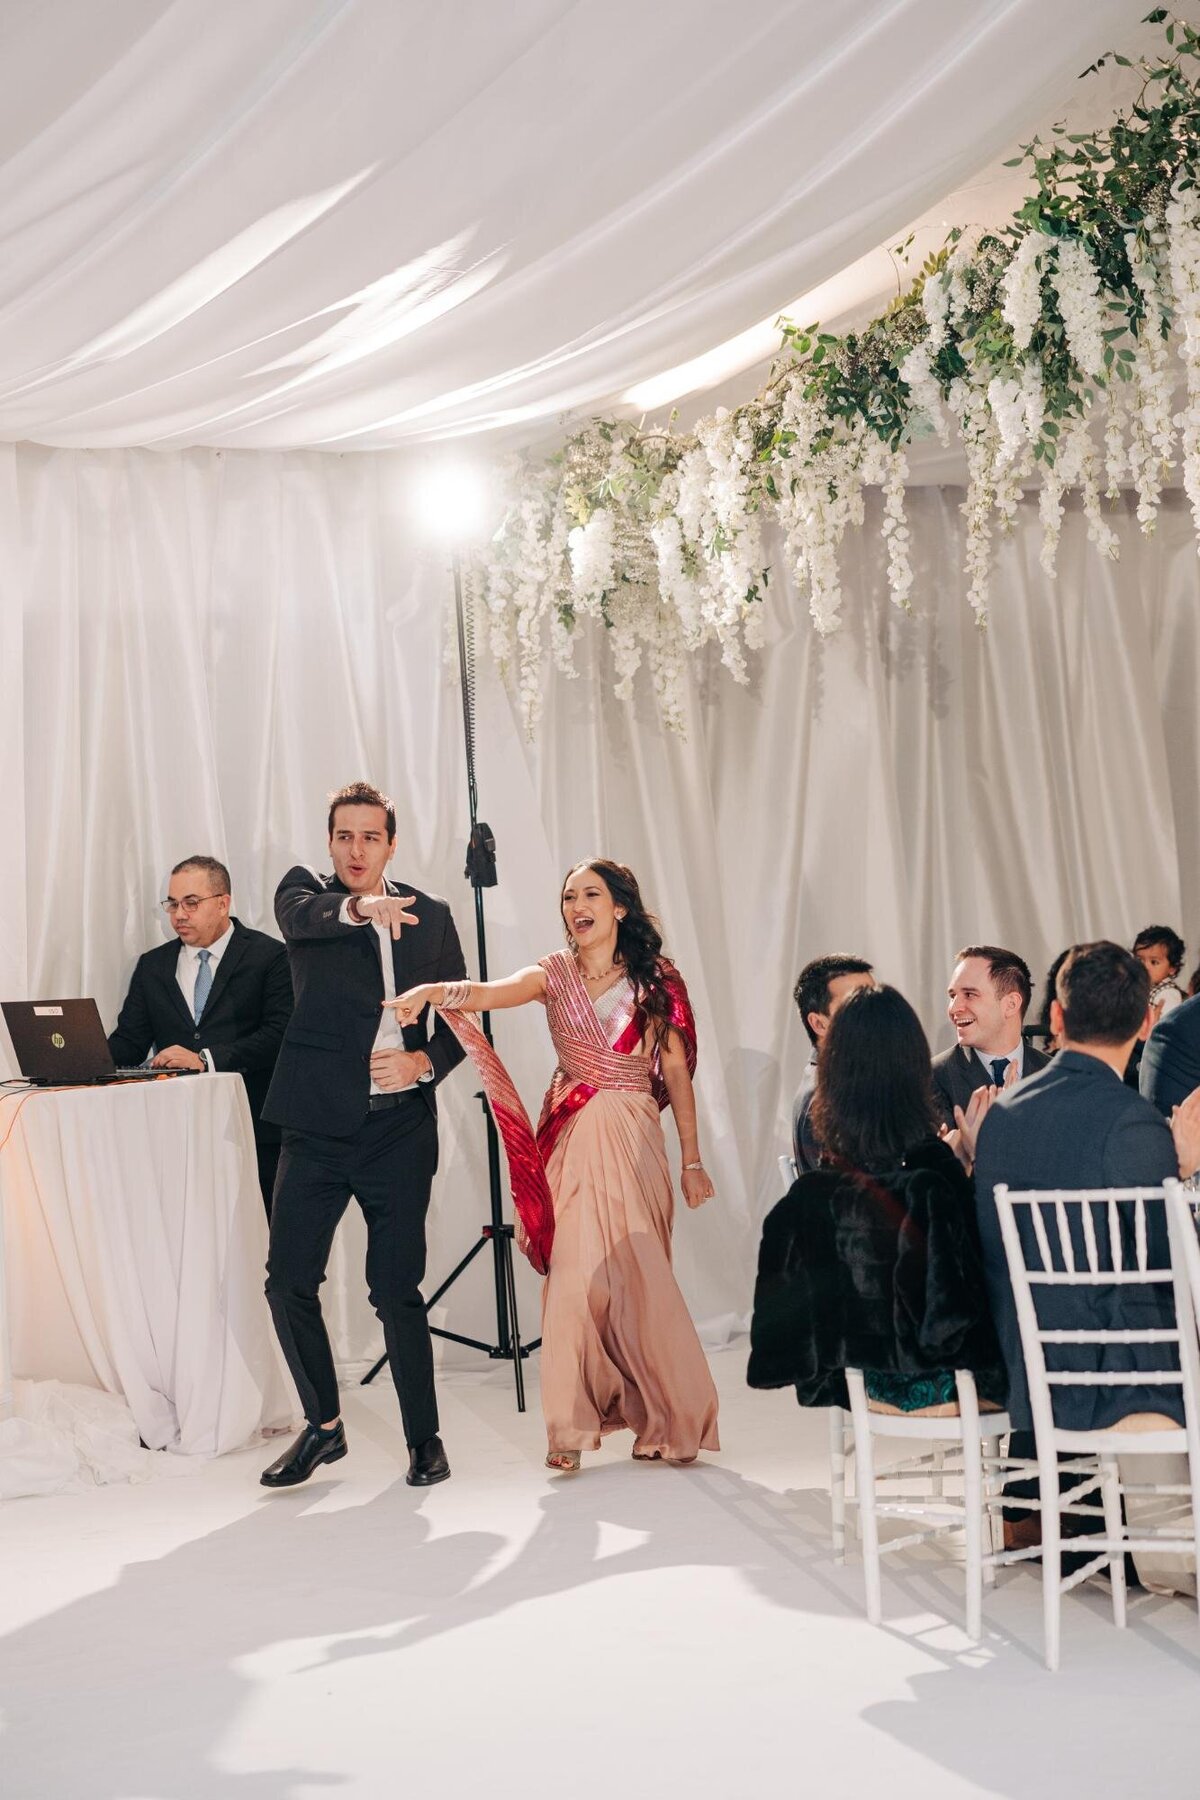 A woman in a pink dress and a man in a suit enthusiastically dancing at a wedding reception while a dj performs.